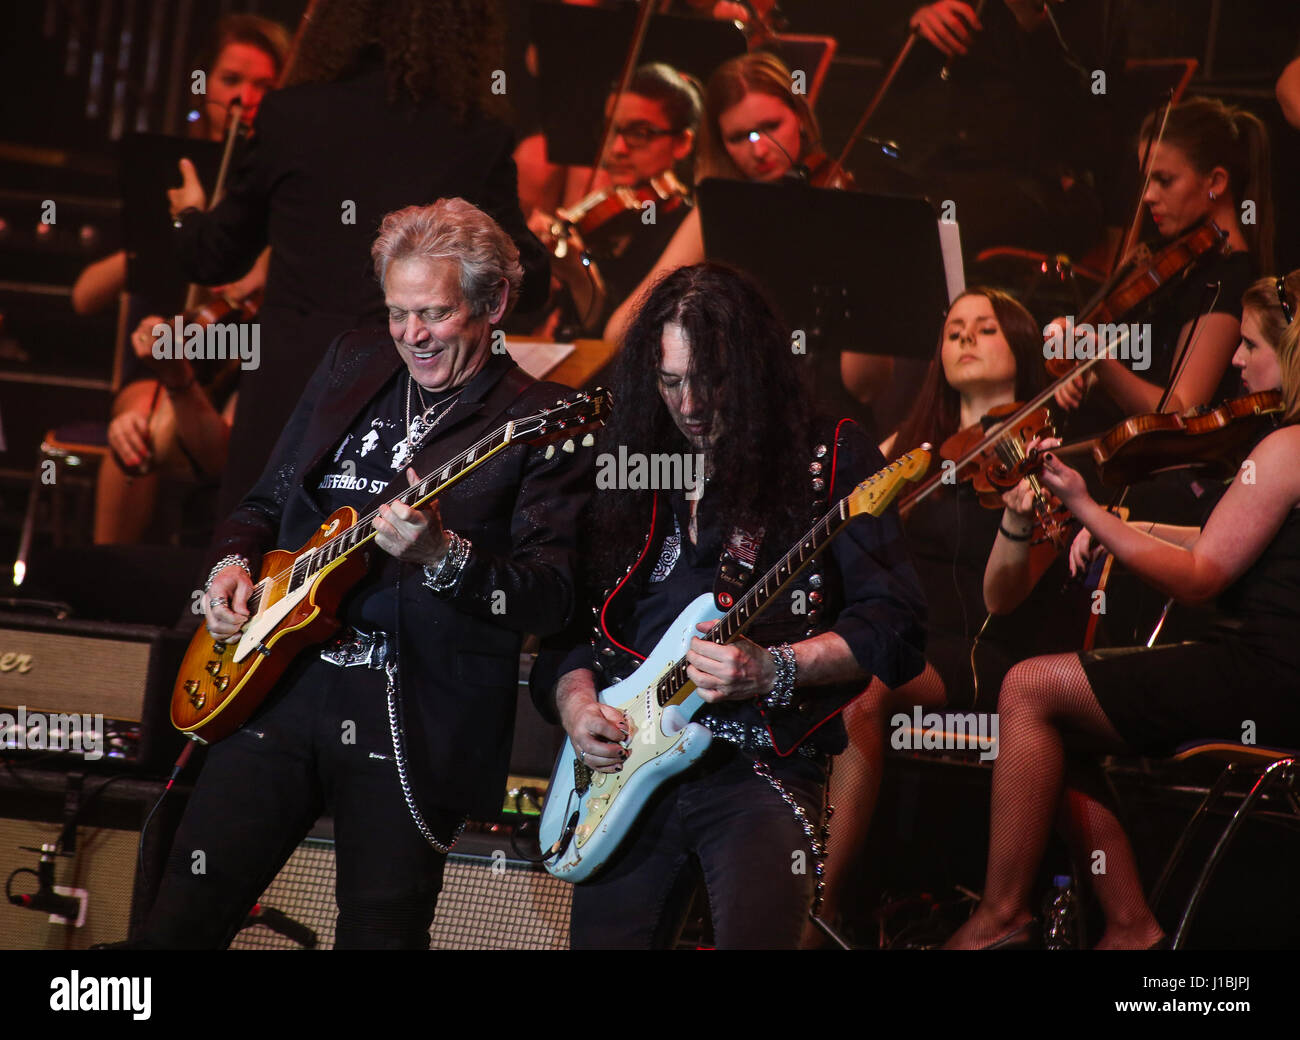 Wetzlar, Germany, 13th April, 2017. Don Felder (left), ex-guitarist of Californian country rock band Eagles (here with guitarist Alex Beyrodt/Mat Sinner Band, right) performs at Rock meets Classic 2017, concert show with rock legends as soloists, accompanied by Mat Sinner Band and Bohemian Symphony Orchestra Prague. Venue: Rittal-Arena, Wetzlar, Germany. Fotocredit: Christian Lademann Stock Photo